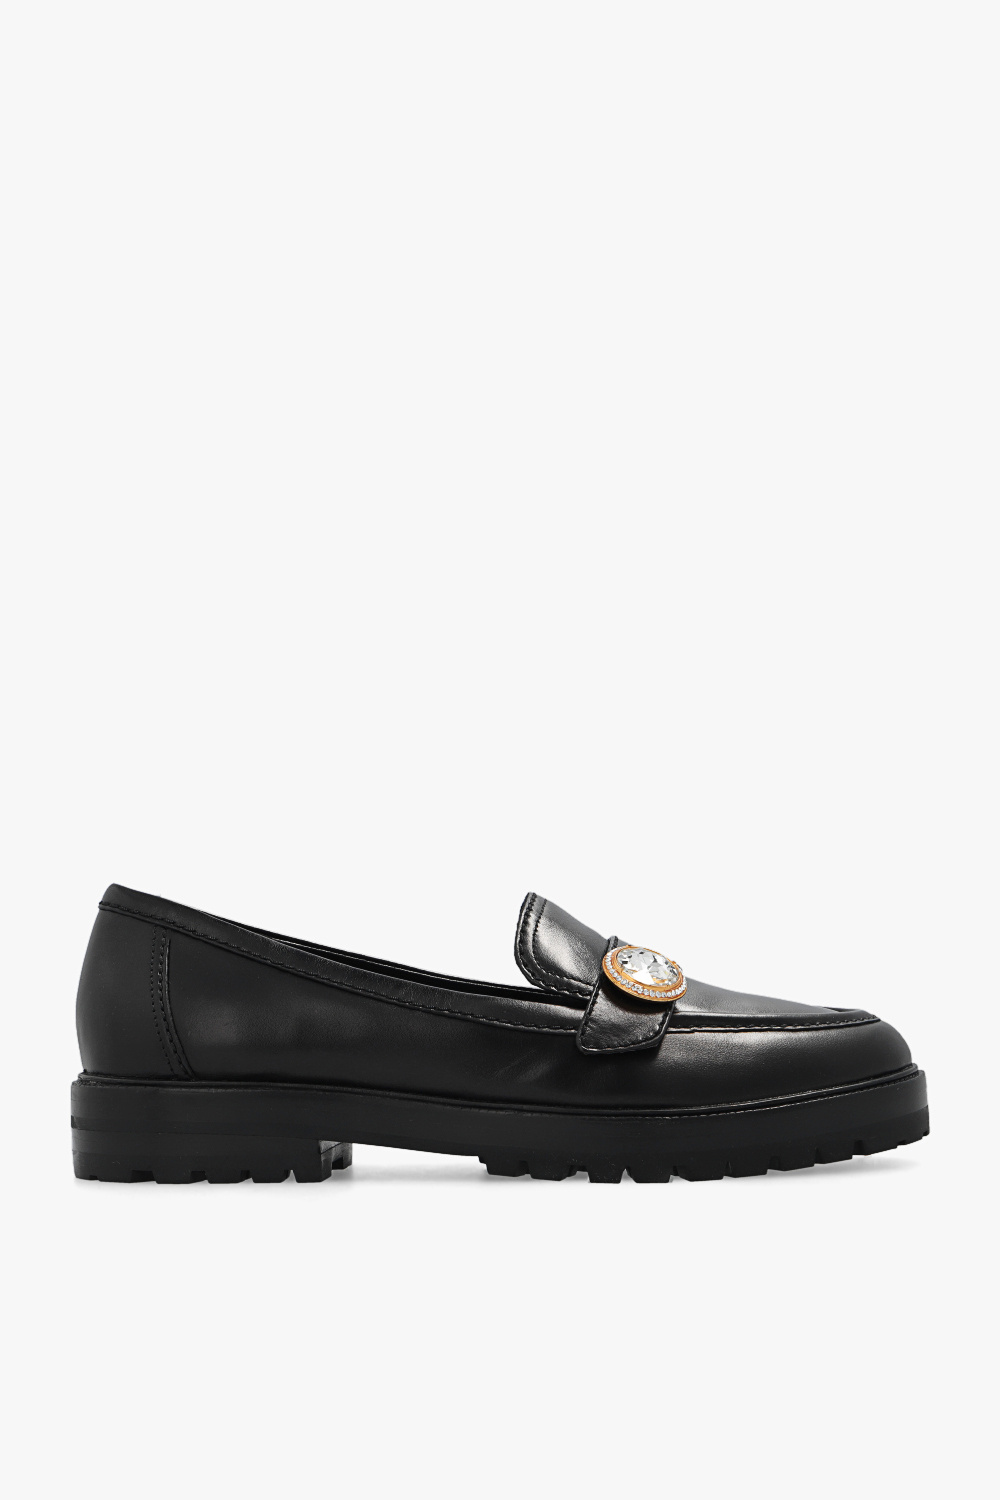 Kate Spade Leather loafers | Women's Shoes | Vitkac